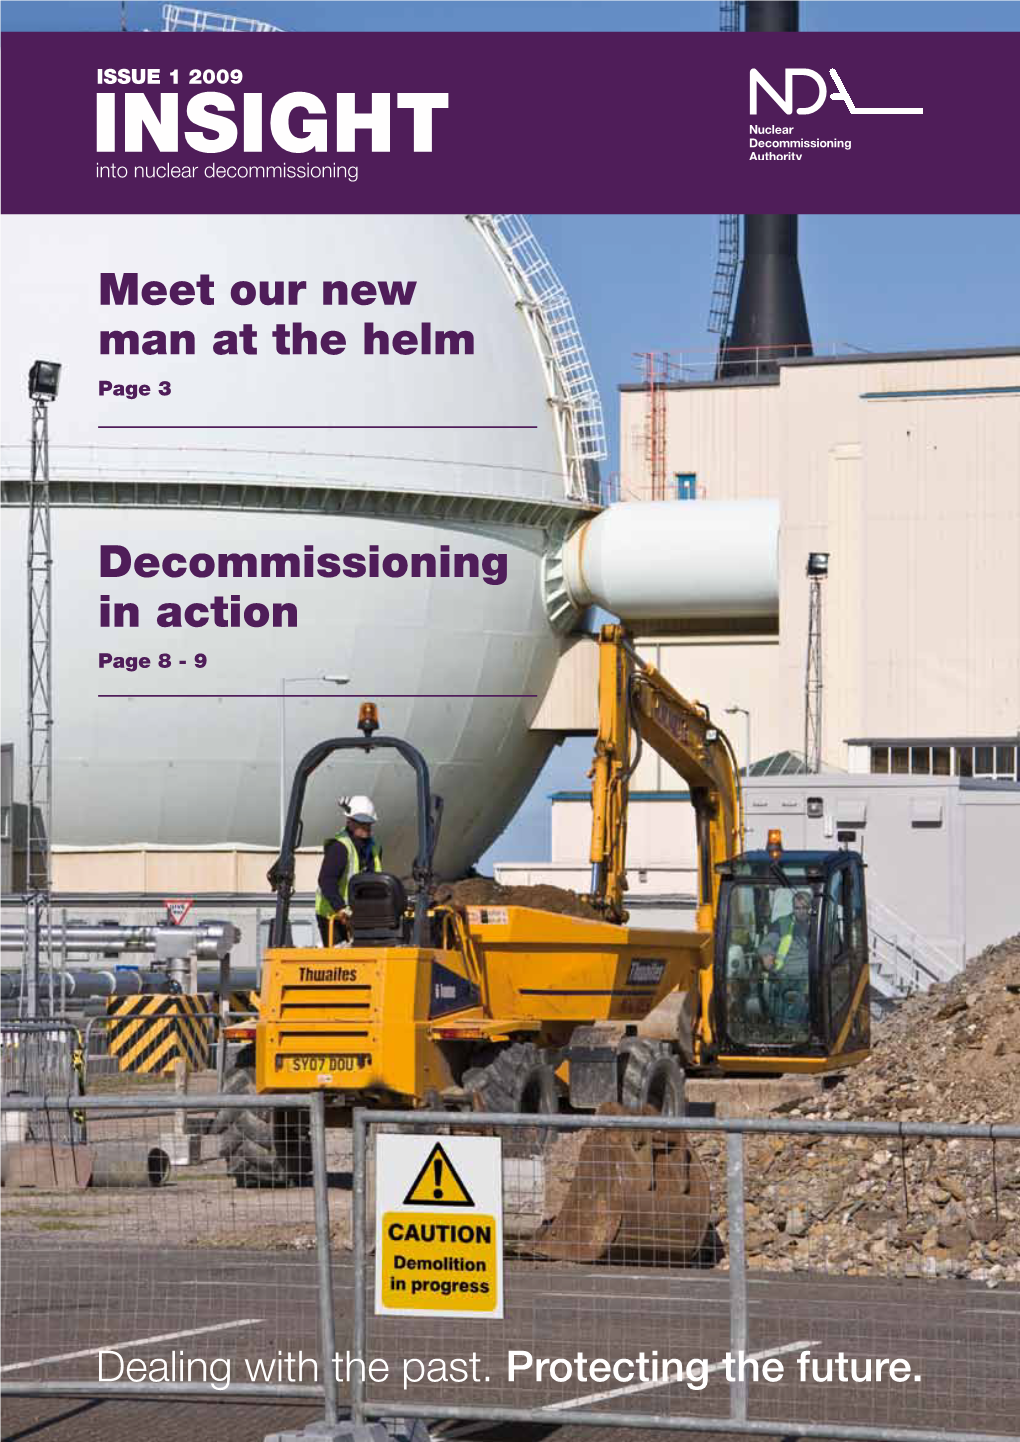 INSIGHT Into Nuclear Decommissioning